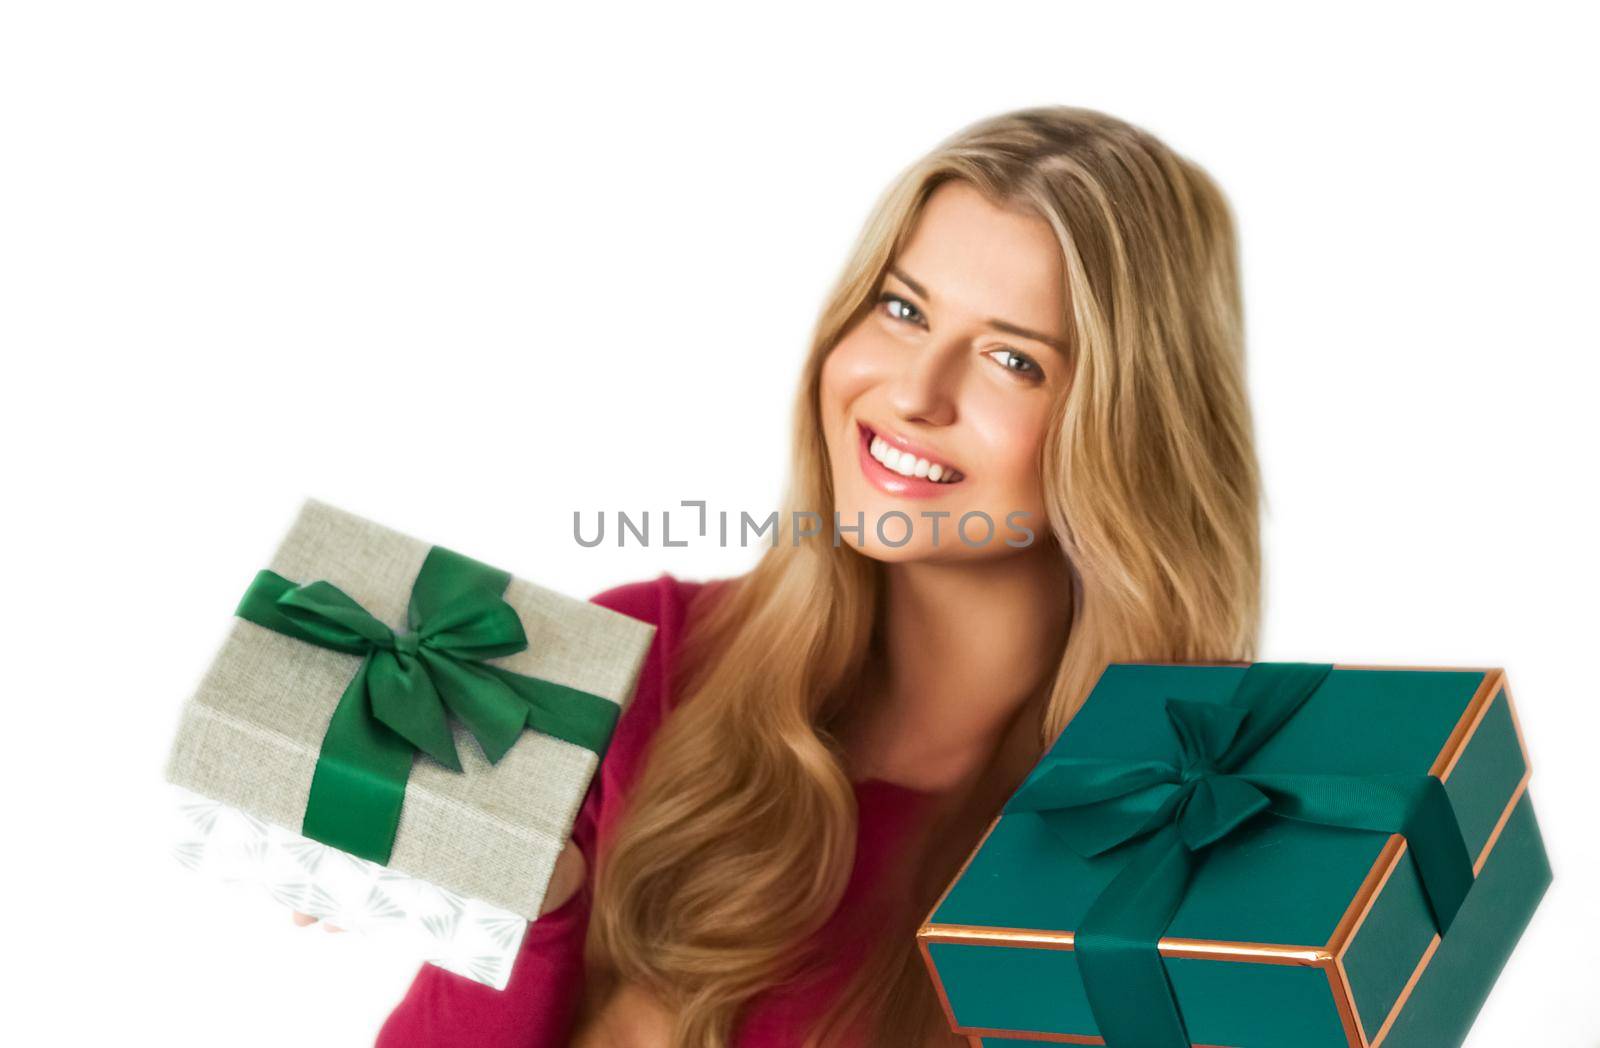 Christmas gifts and holiday presents, happy woman holding gift boxes isolated on white background, portrait